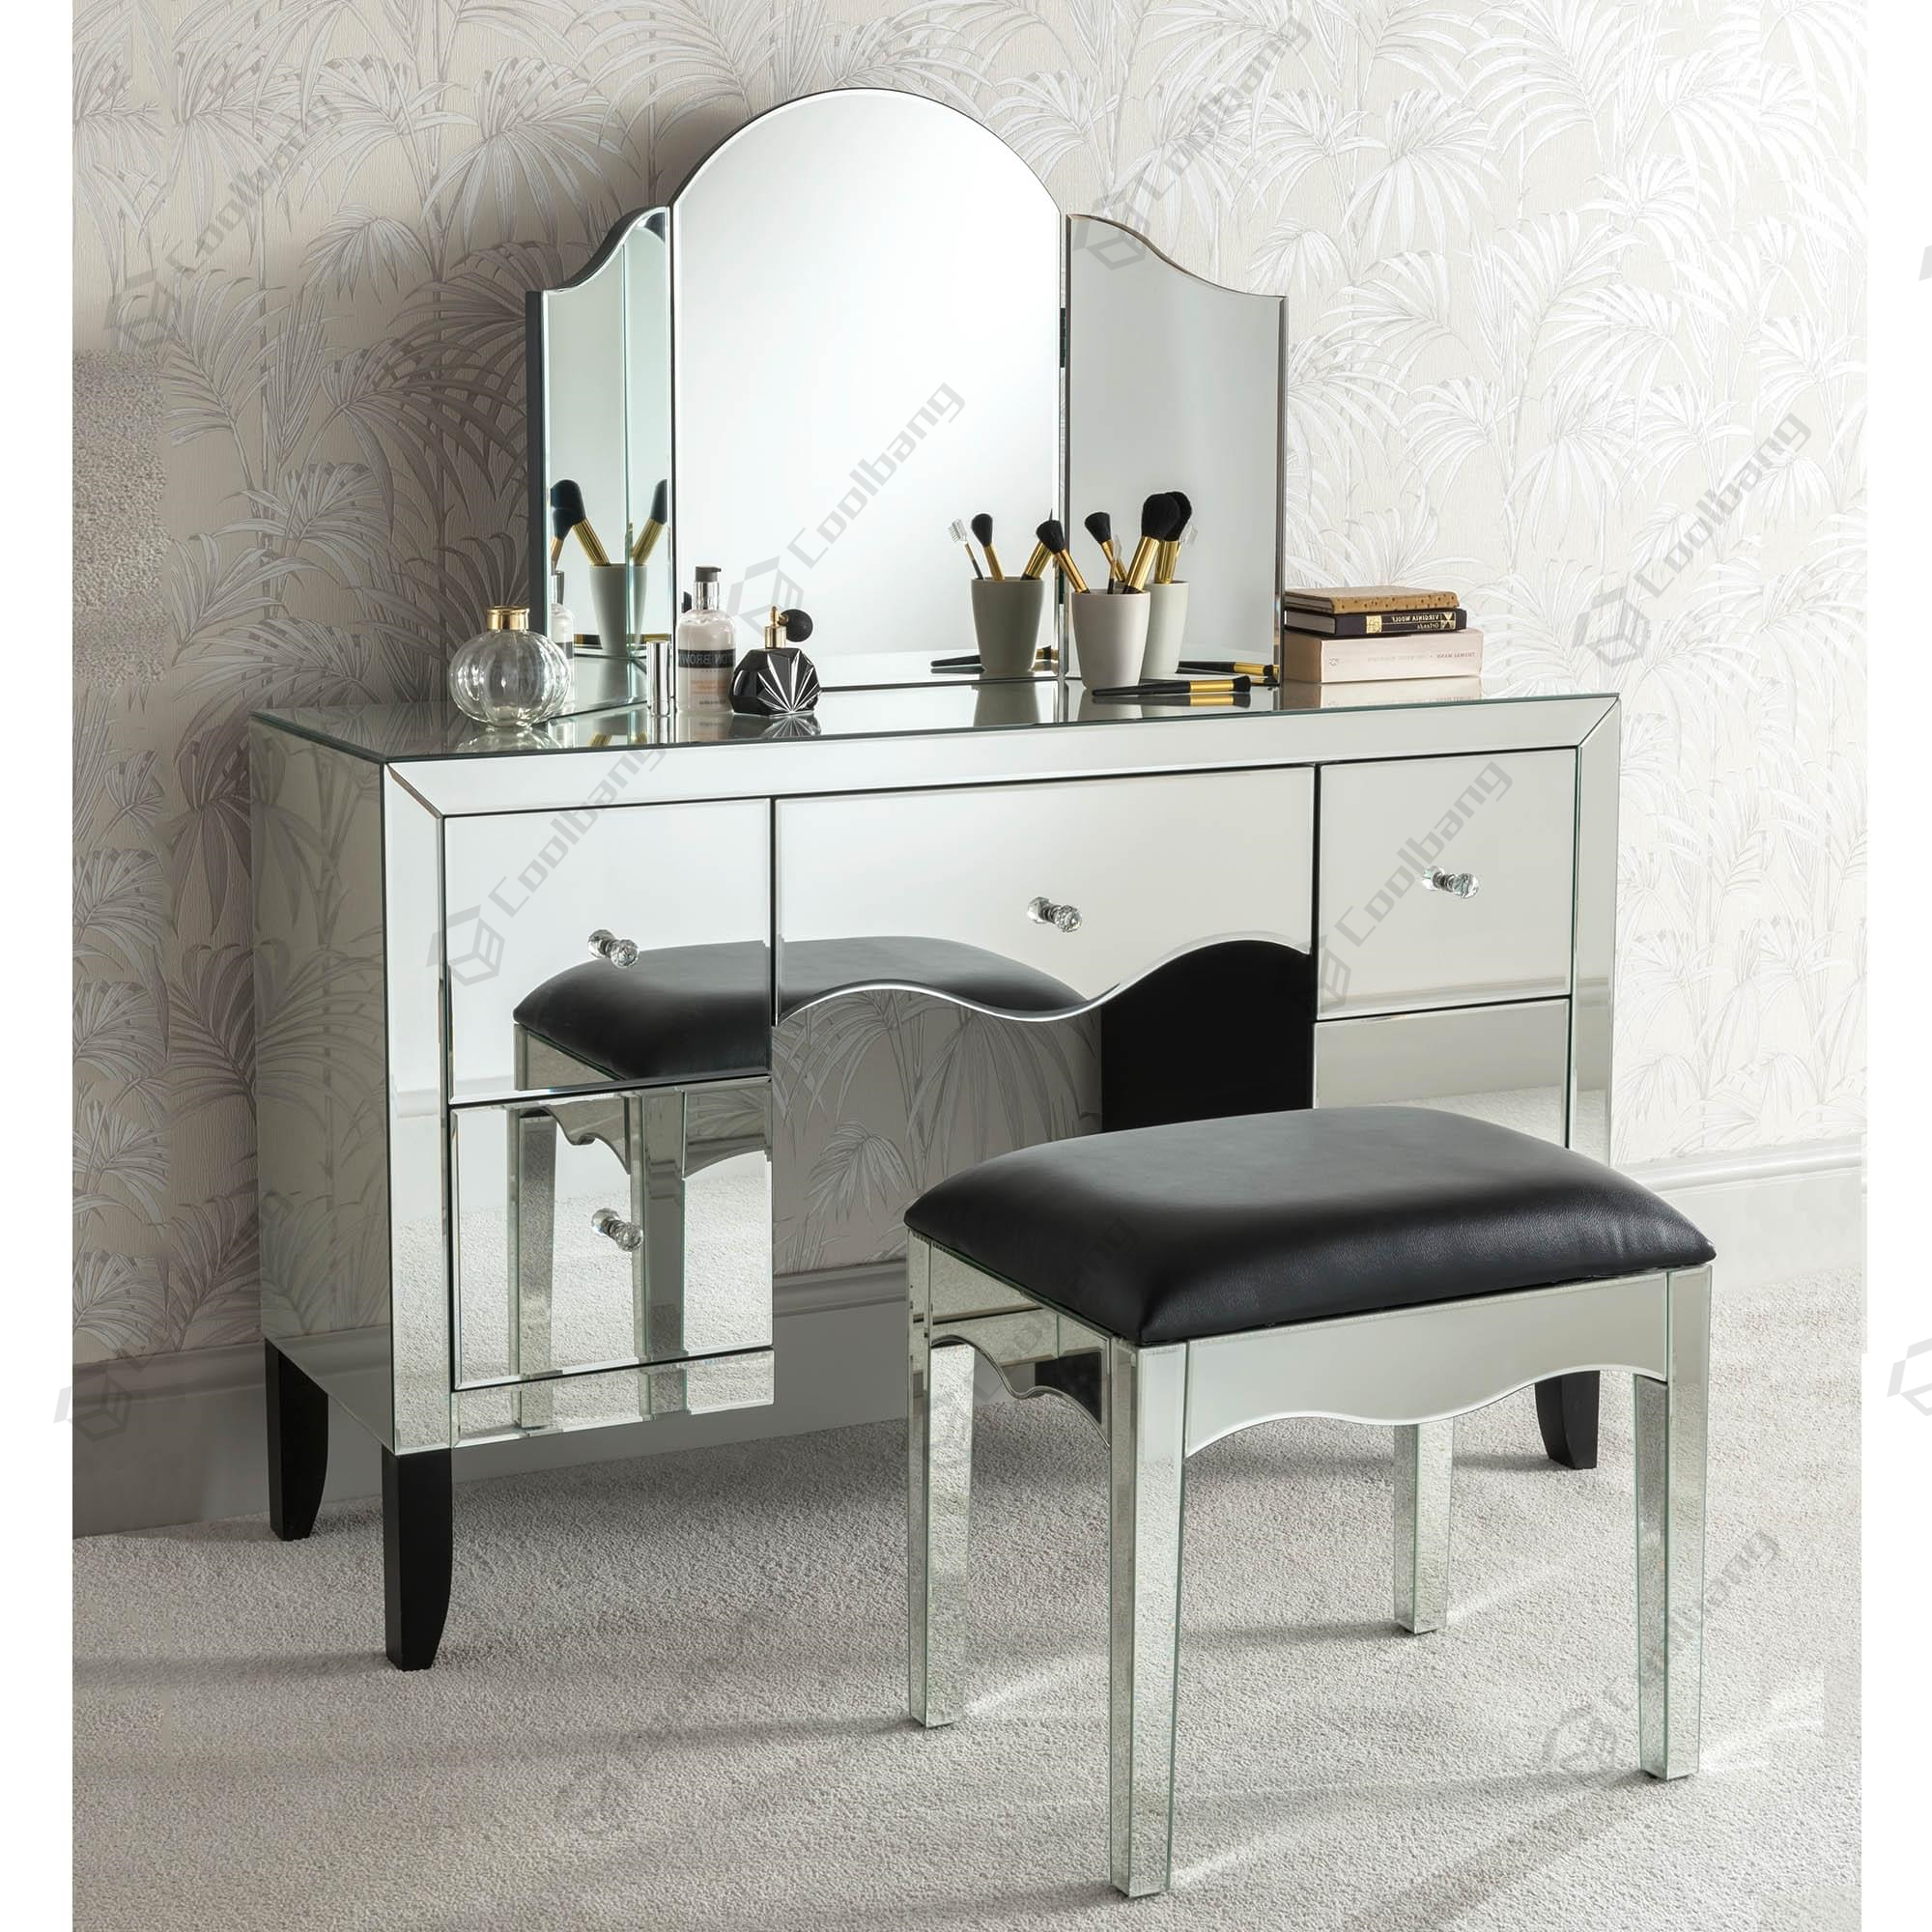 Mirrored Dressing Table,Dressing Table